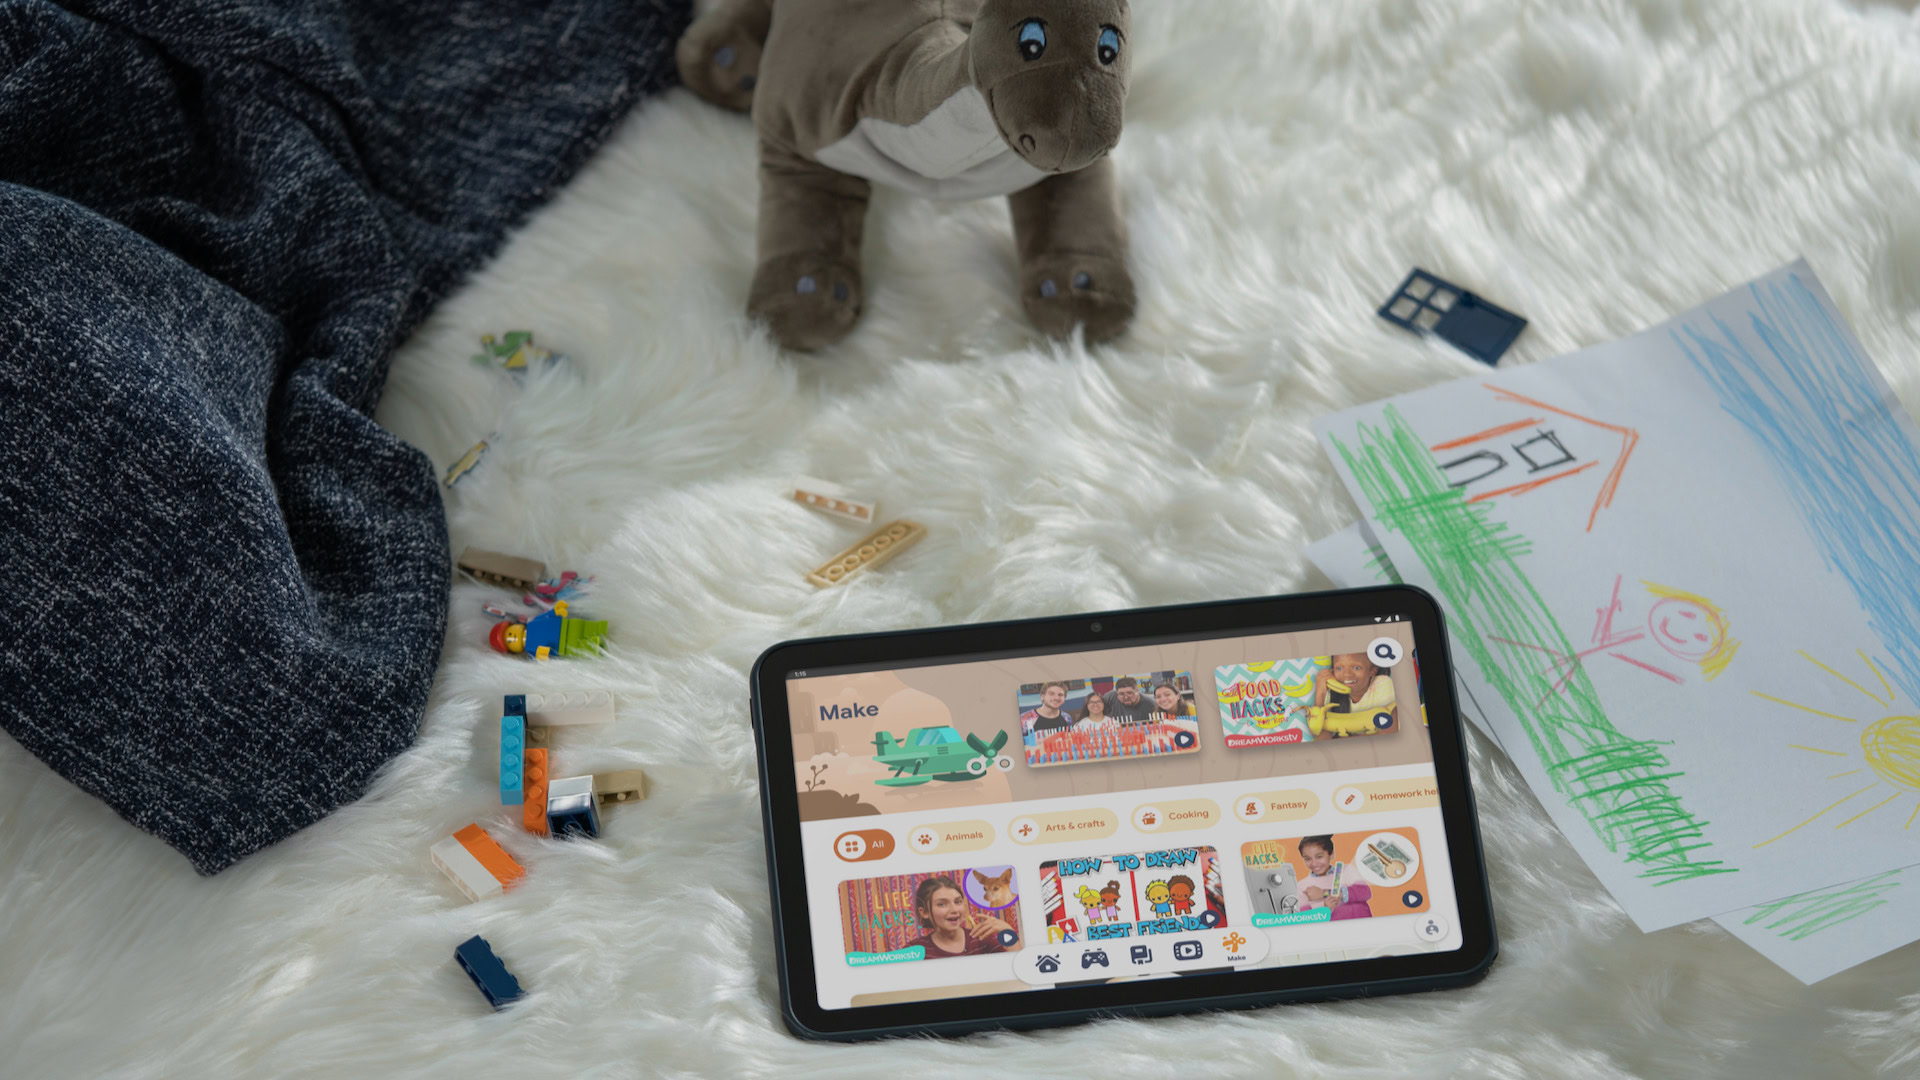 Nokia T20 tablet with kids stuff